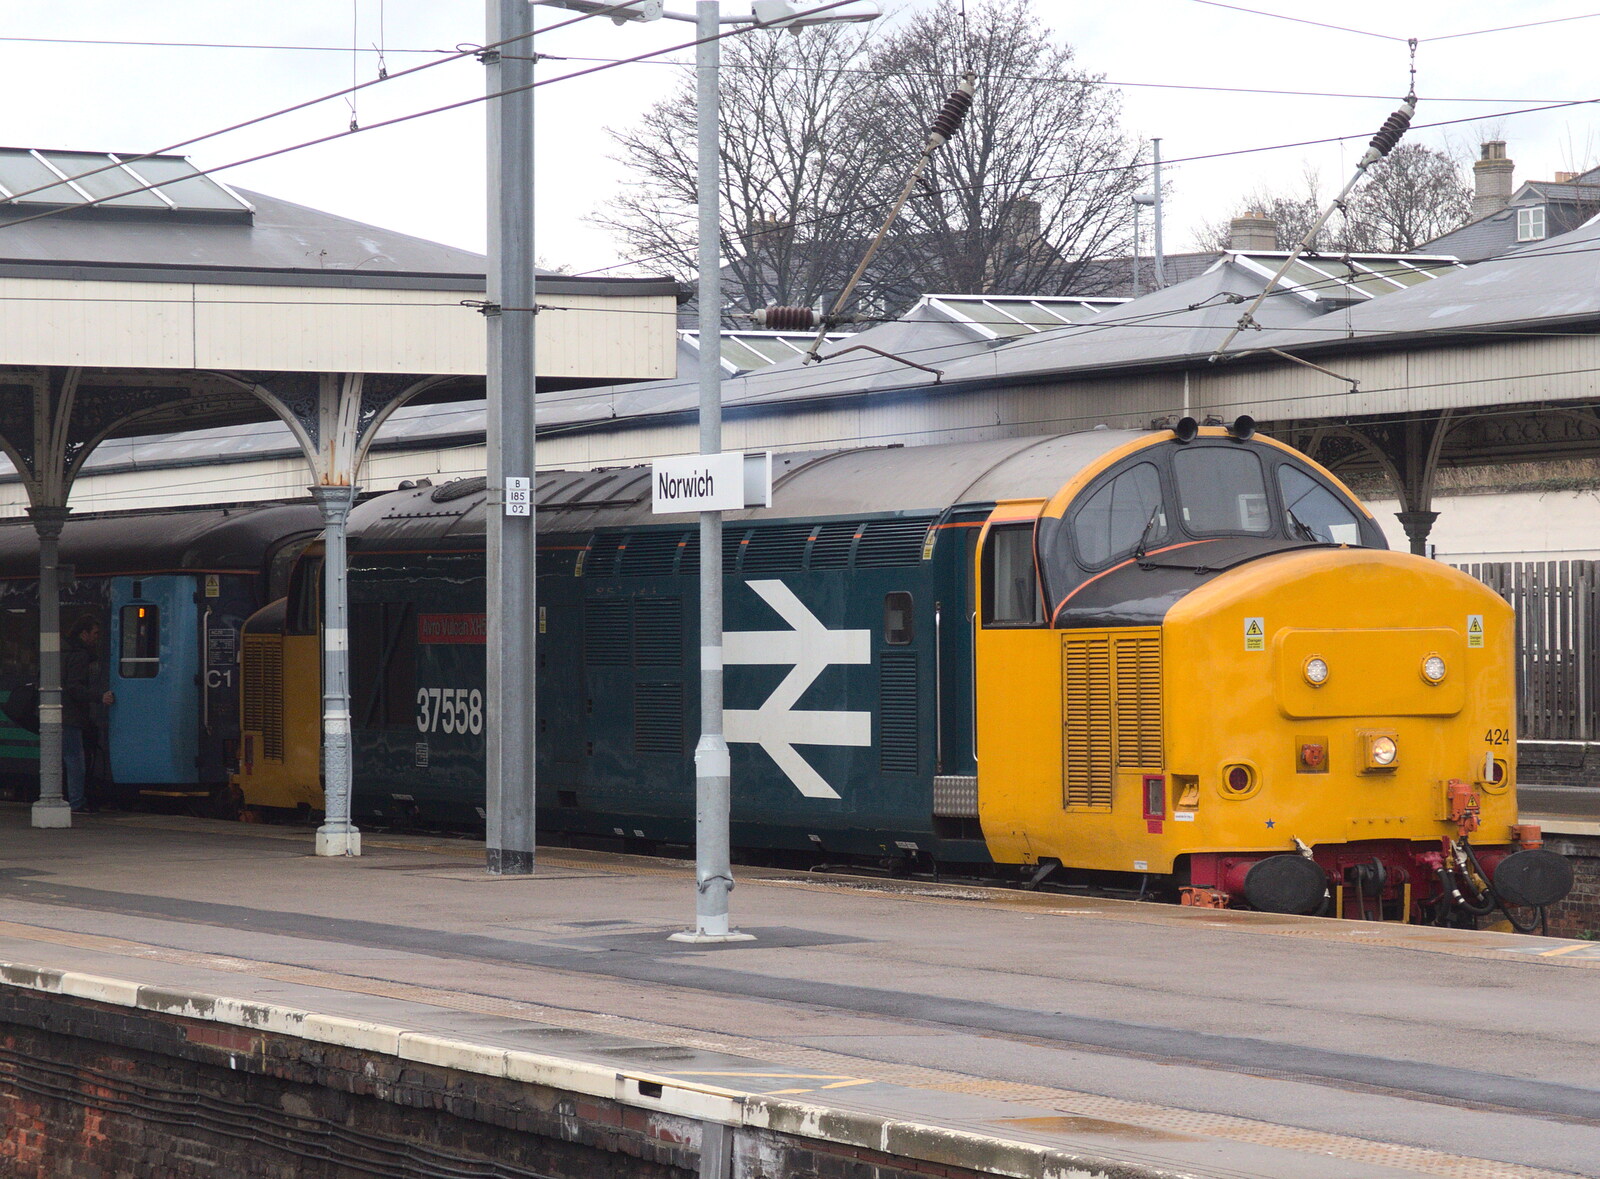 An ancient Class 37 - 37558 - at Norwich from Norwich Station and the Light Tunnel, Norwich, Norfolk  - 21st December 2016